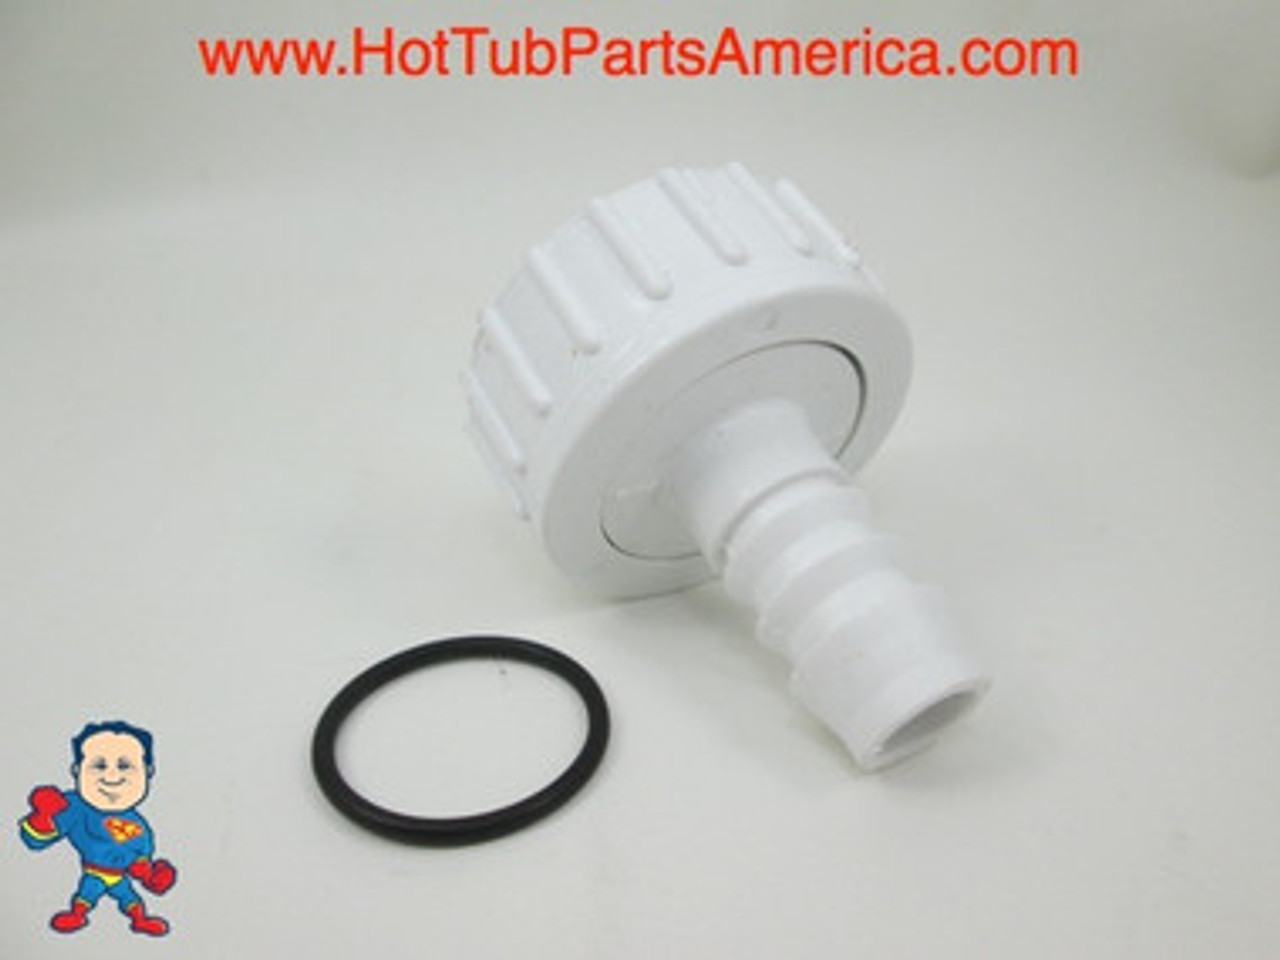 Hot Tub Spa 1" X 3/4" Barb Pump Union O-Ring Use with Tiny Might and other Pumps